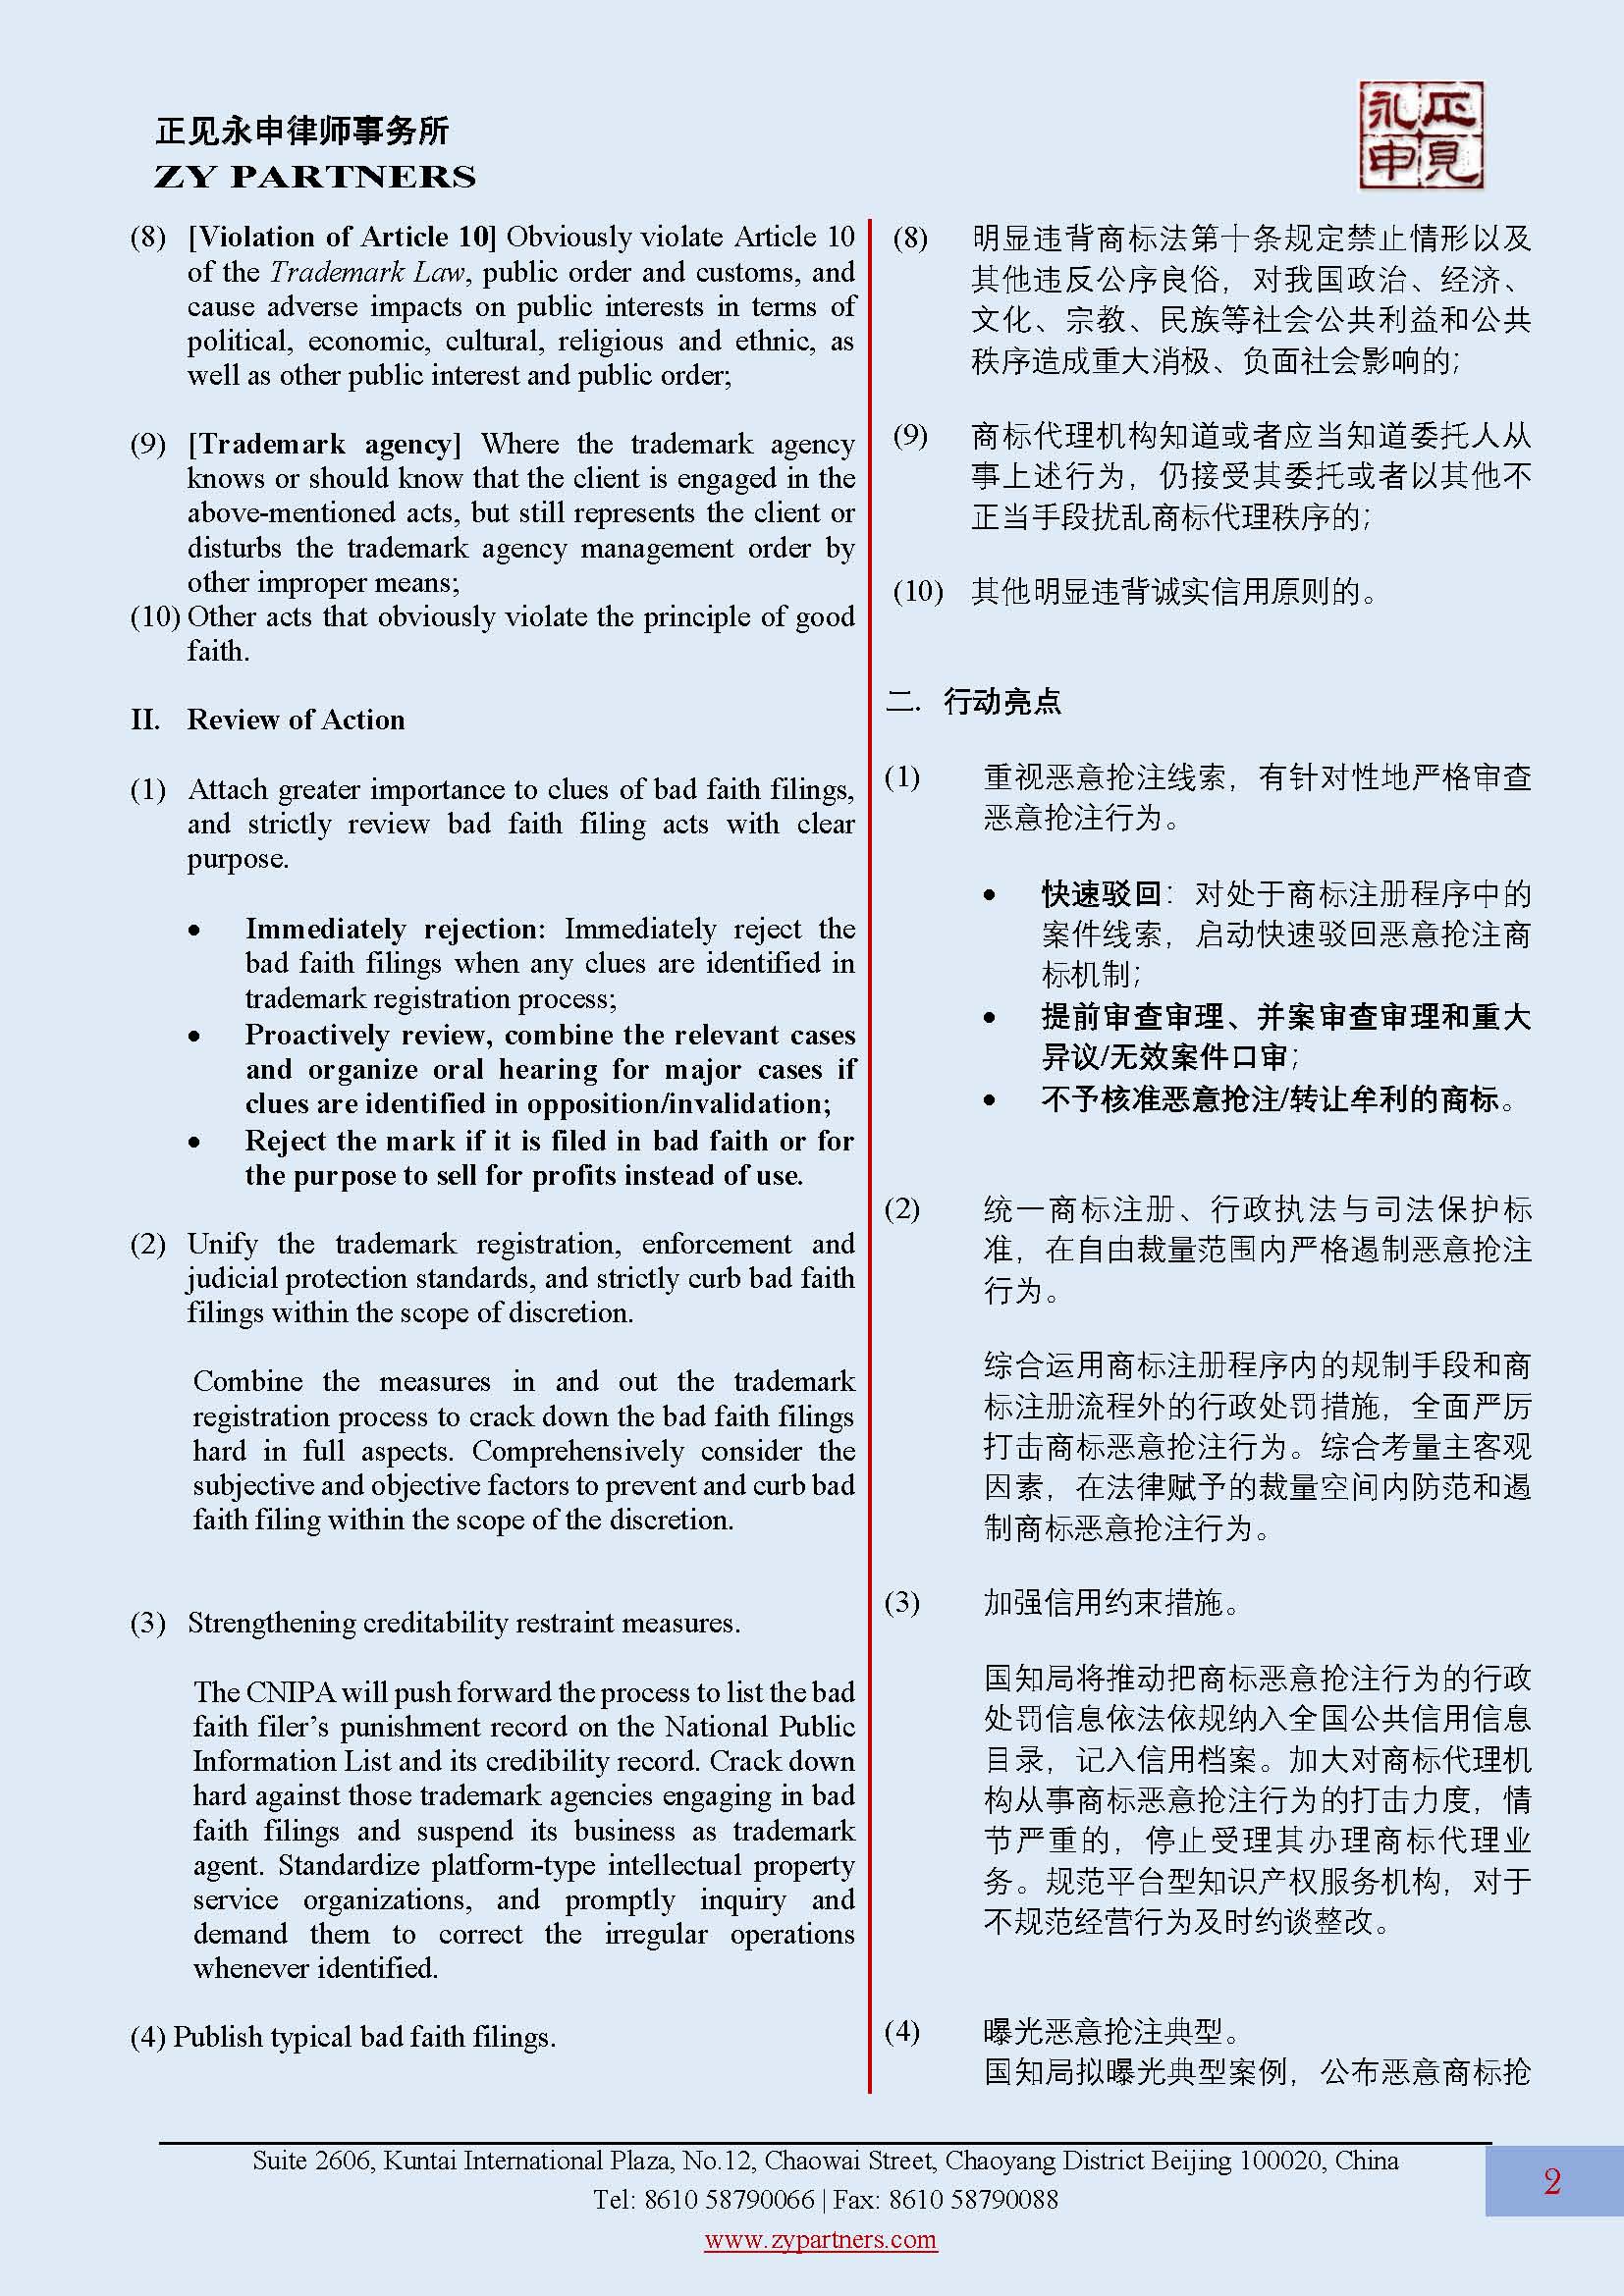 ZY Newsletter on CNIPA Special Action Plan for Combating Bad Faith Filings EN_页面_2.jpg